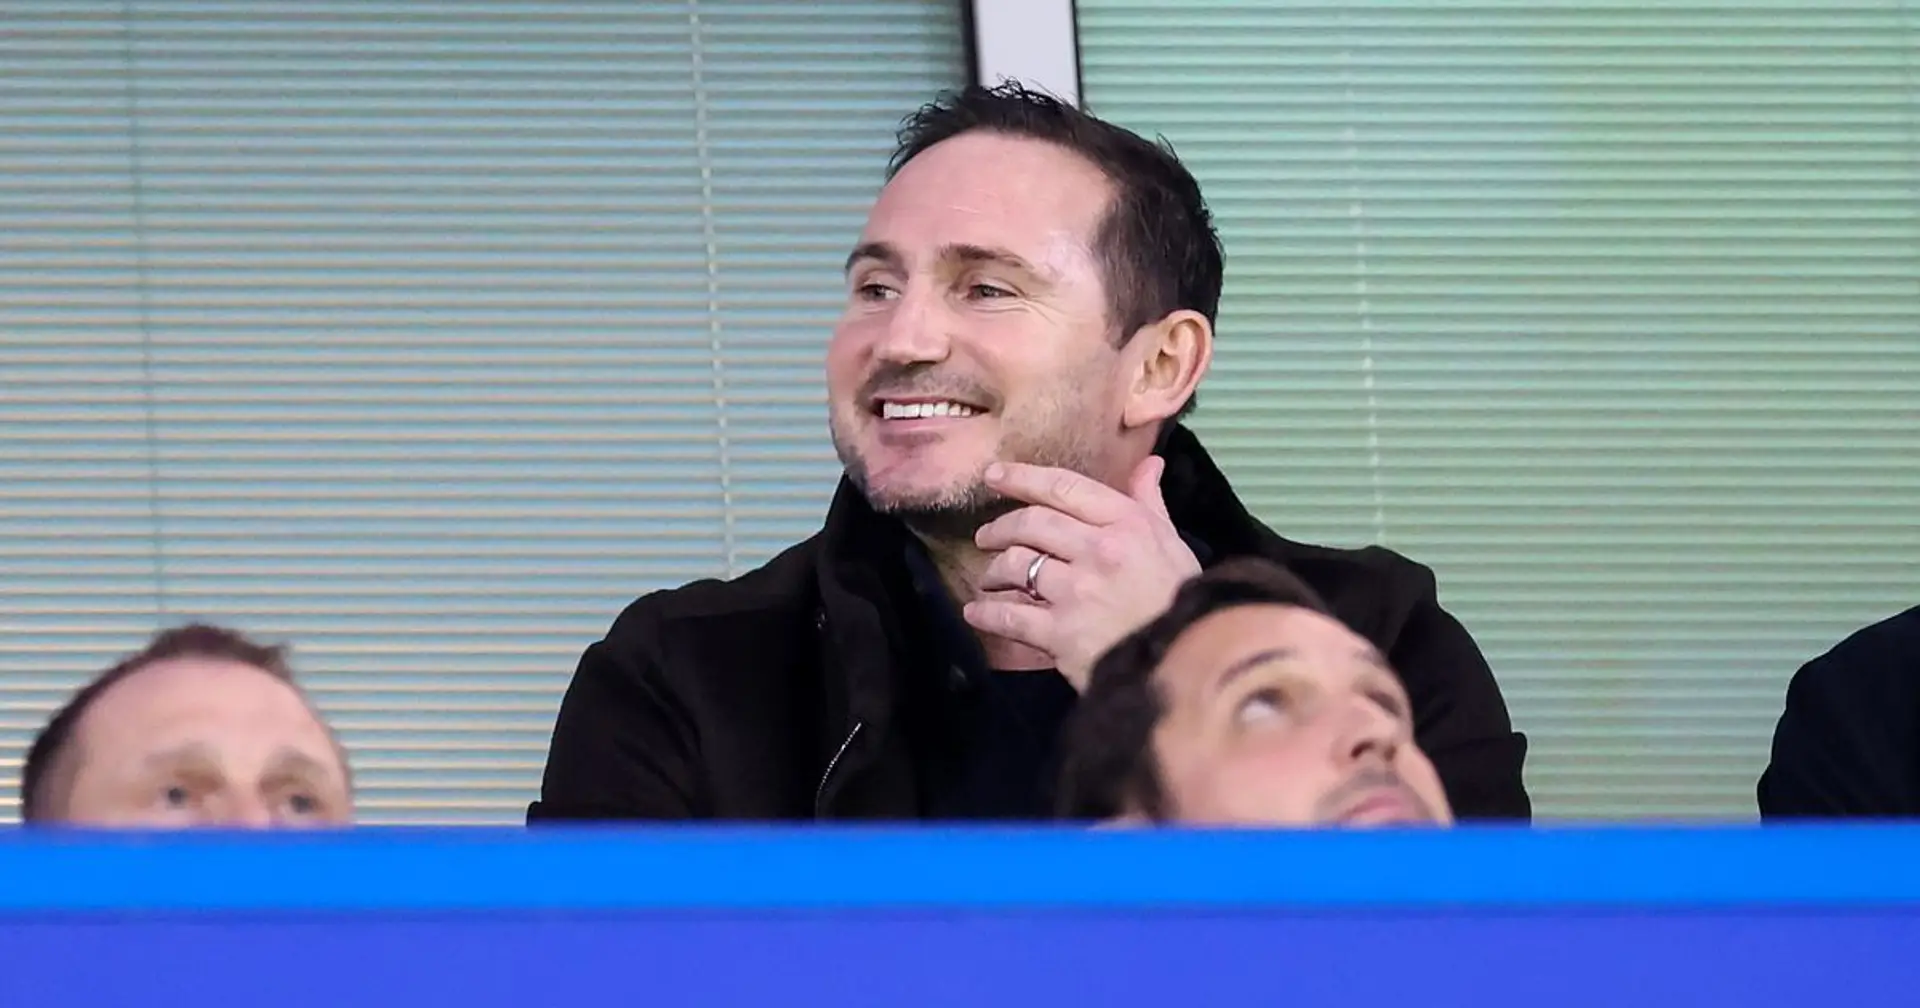 Chelsea reach agreement to install Lampard on interim basis - Ornstein (reliability: 5 stars)